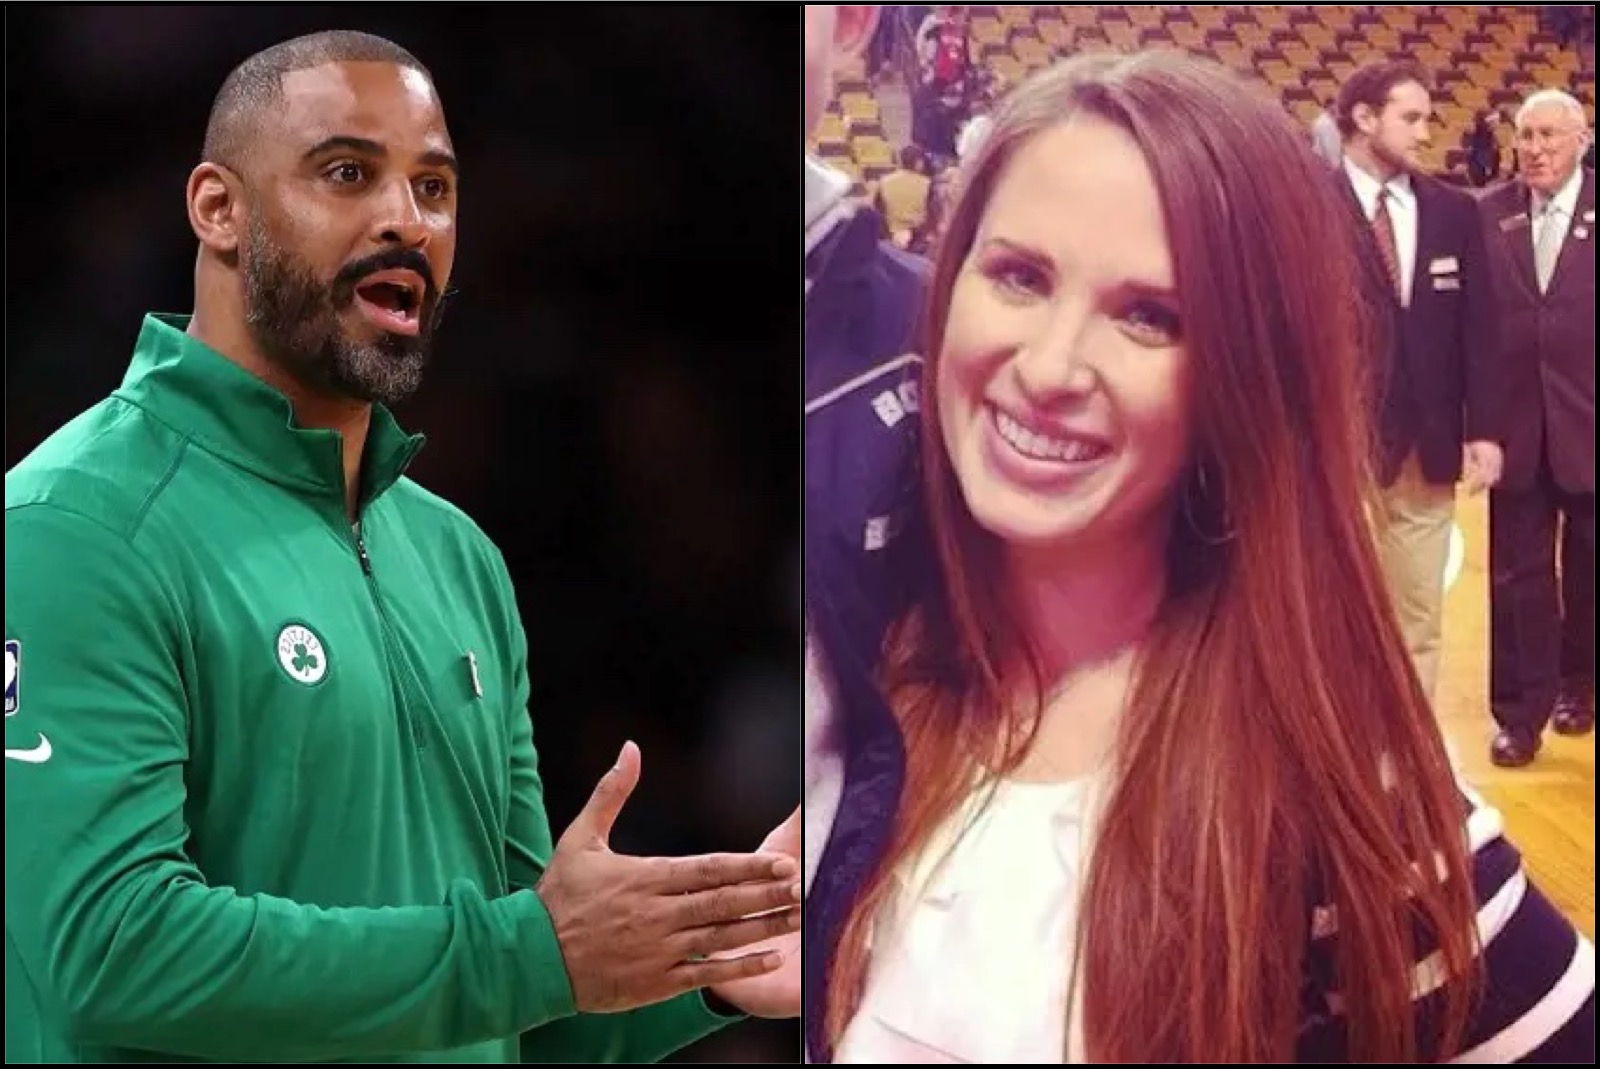 Kathleen Nimmo Lynch’s Husband Decides Not to Divorce Her After Her Office Affair With Ex-Celtics Head Coach Ime Udoka